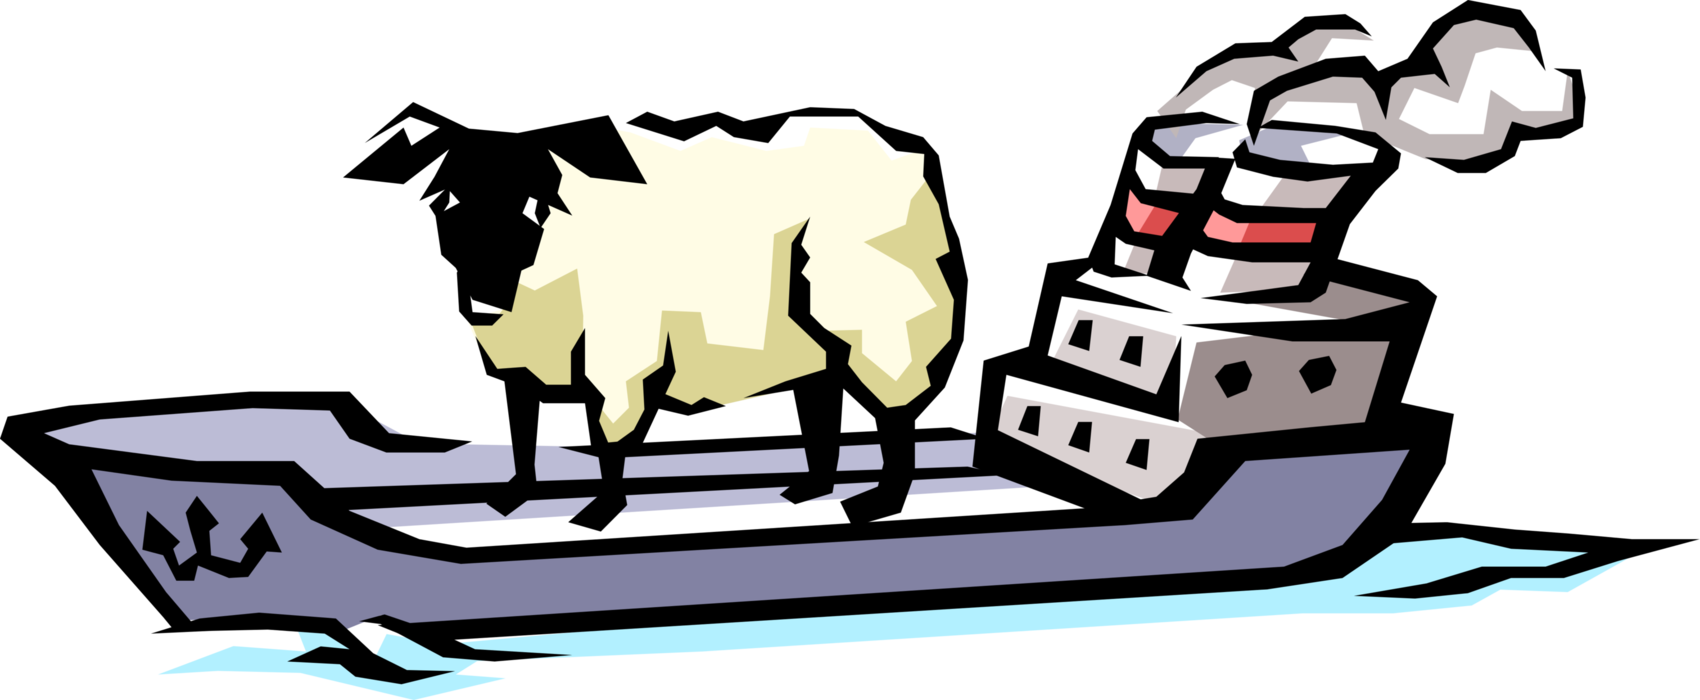 Vector Illustration of Cargo Ship or Freighter Ship or Vessel Carries Sheep and Materials